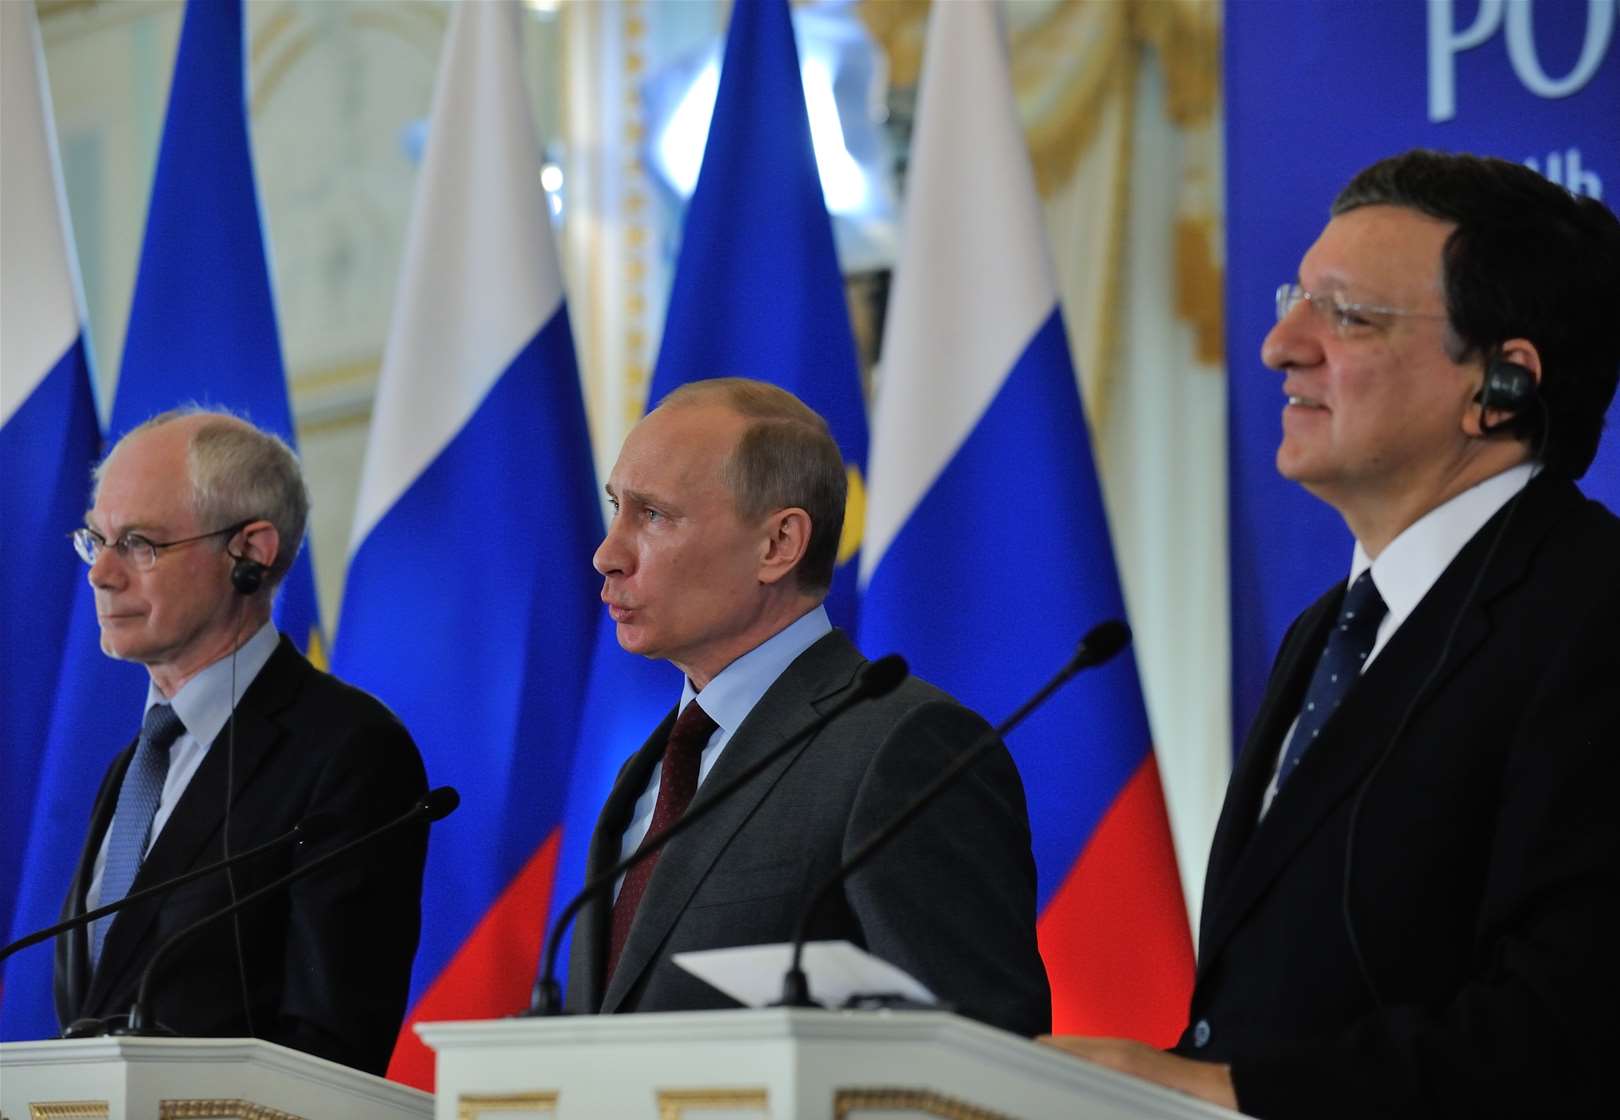 Is Russia's grip on European energy weakening? | Comment | Encompass